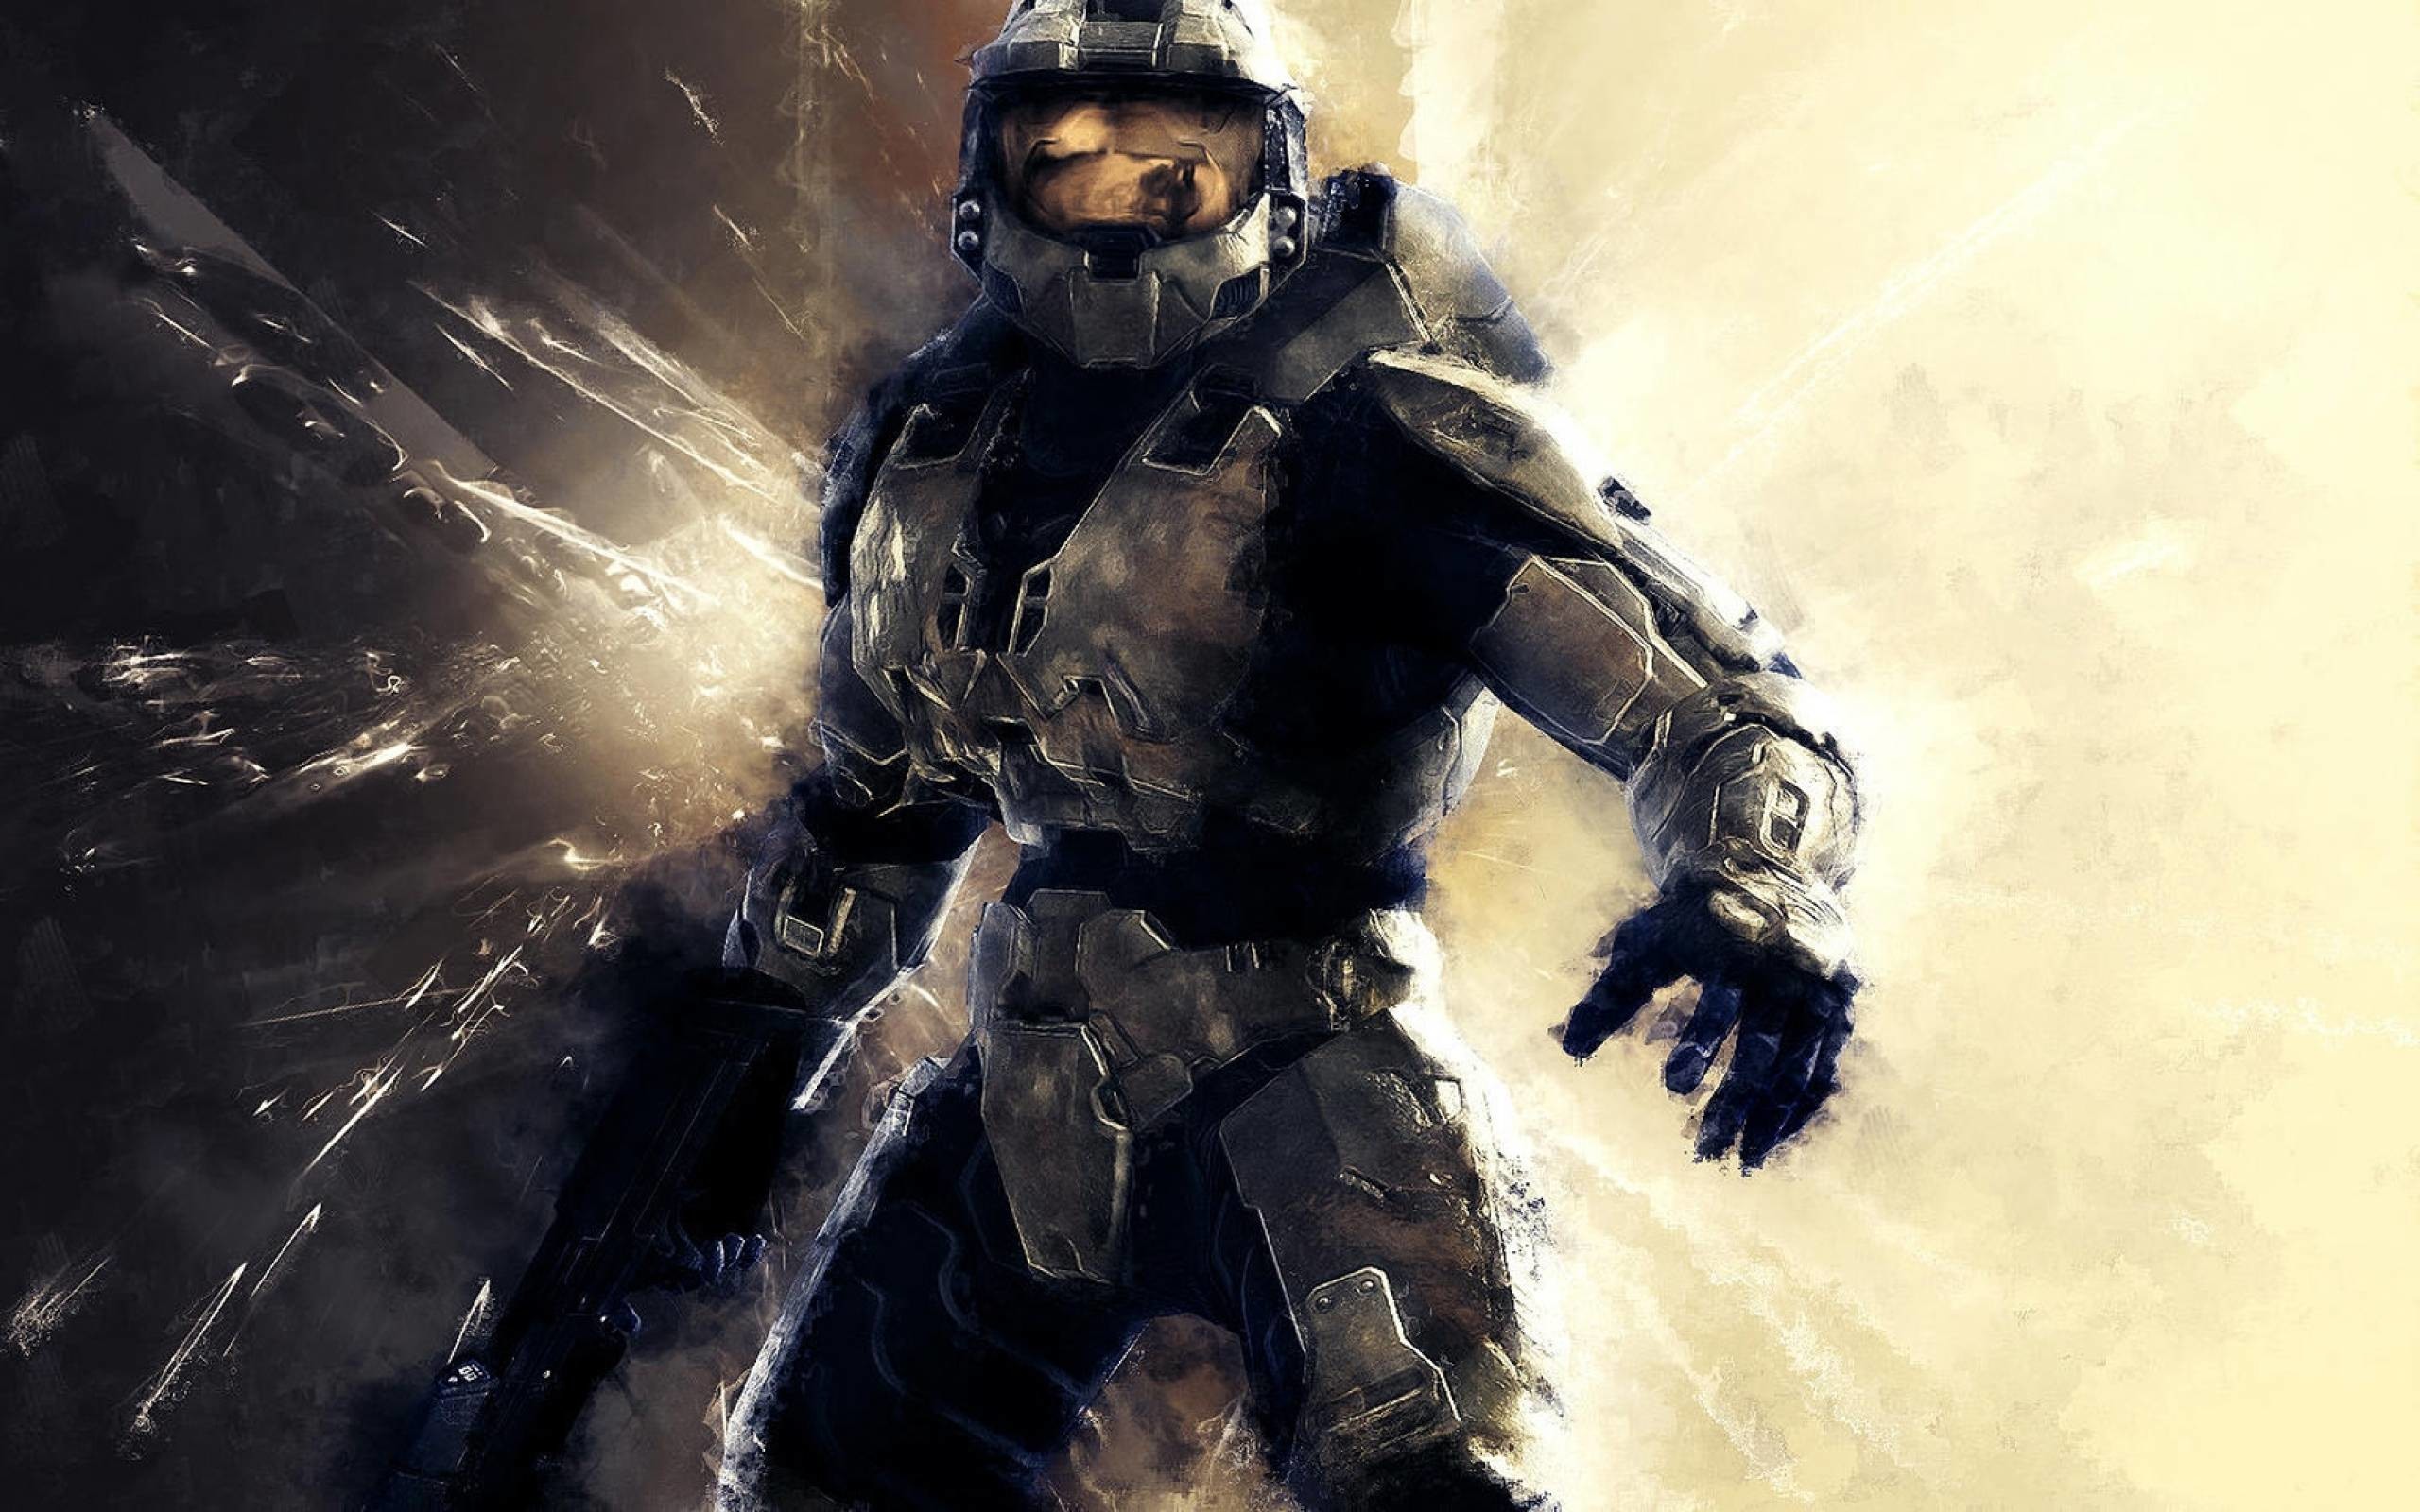 2560x1600 Halo 4 Wallpaper Iphone with HD Wallpaper Resolution  px 352.10 KB  Games 3 5 Iphone